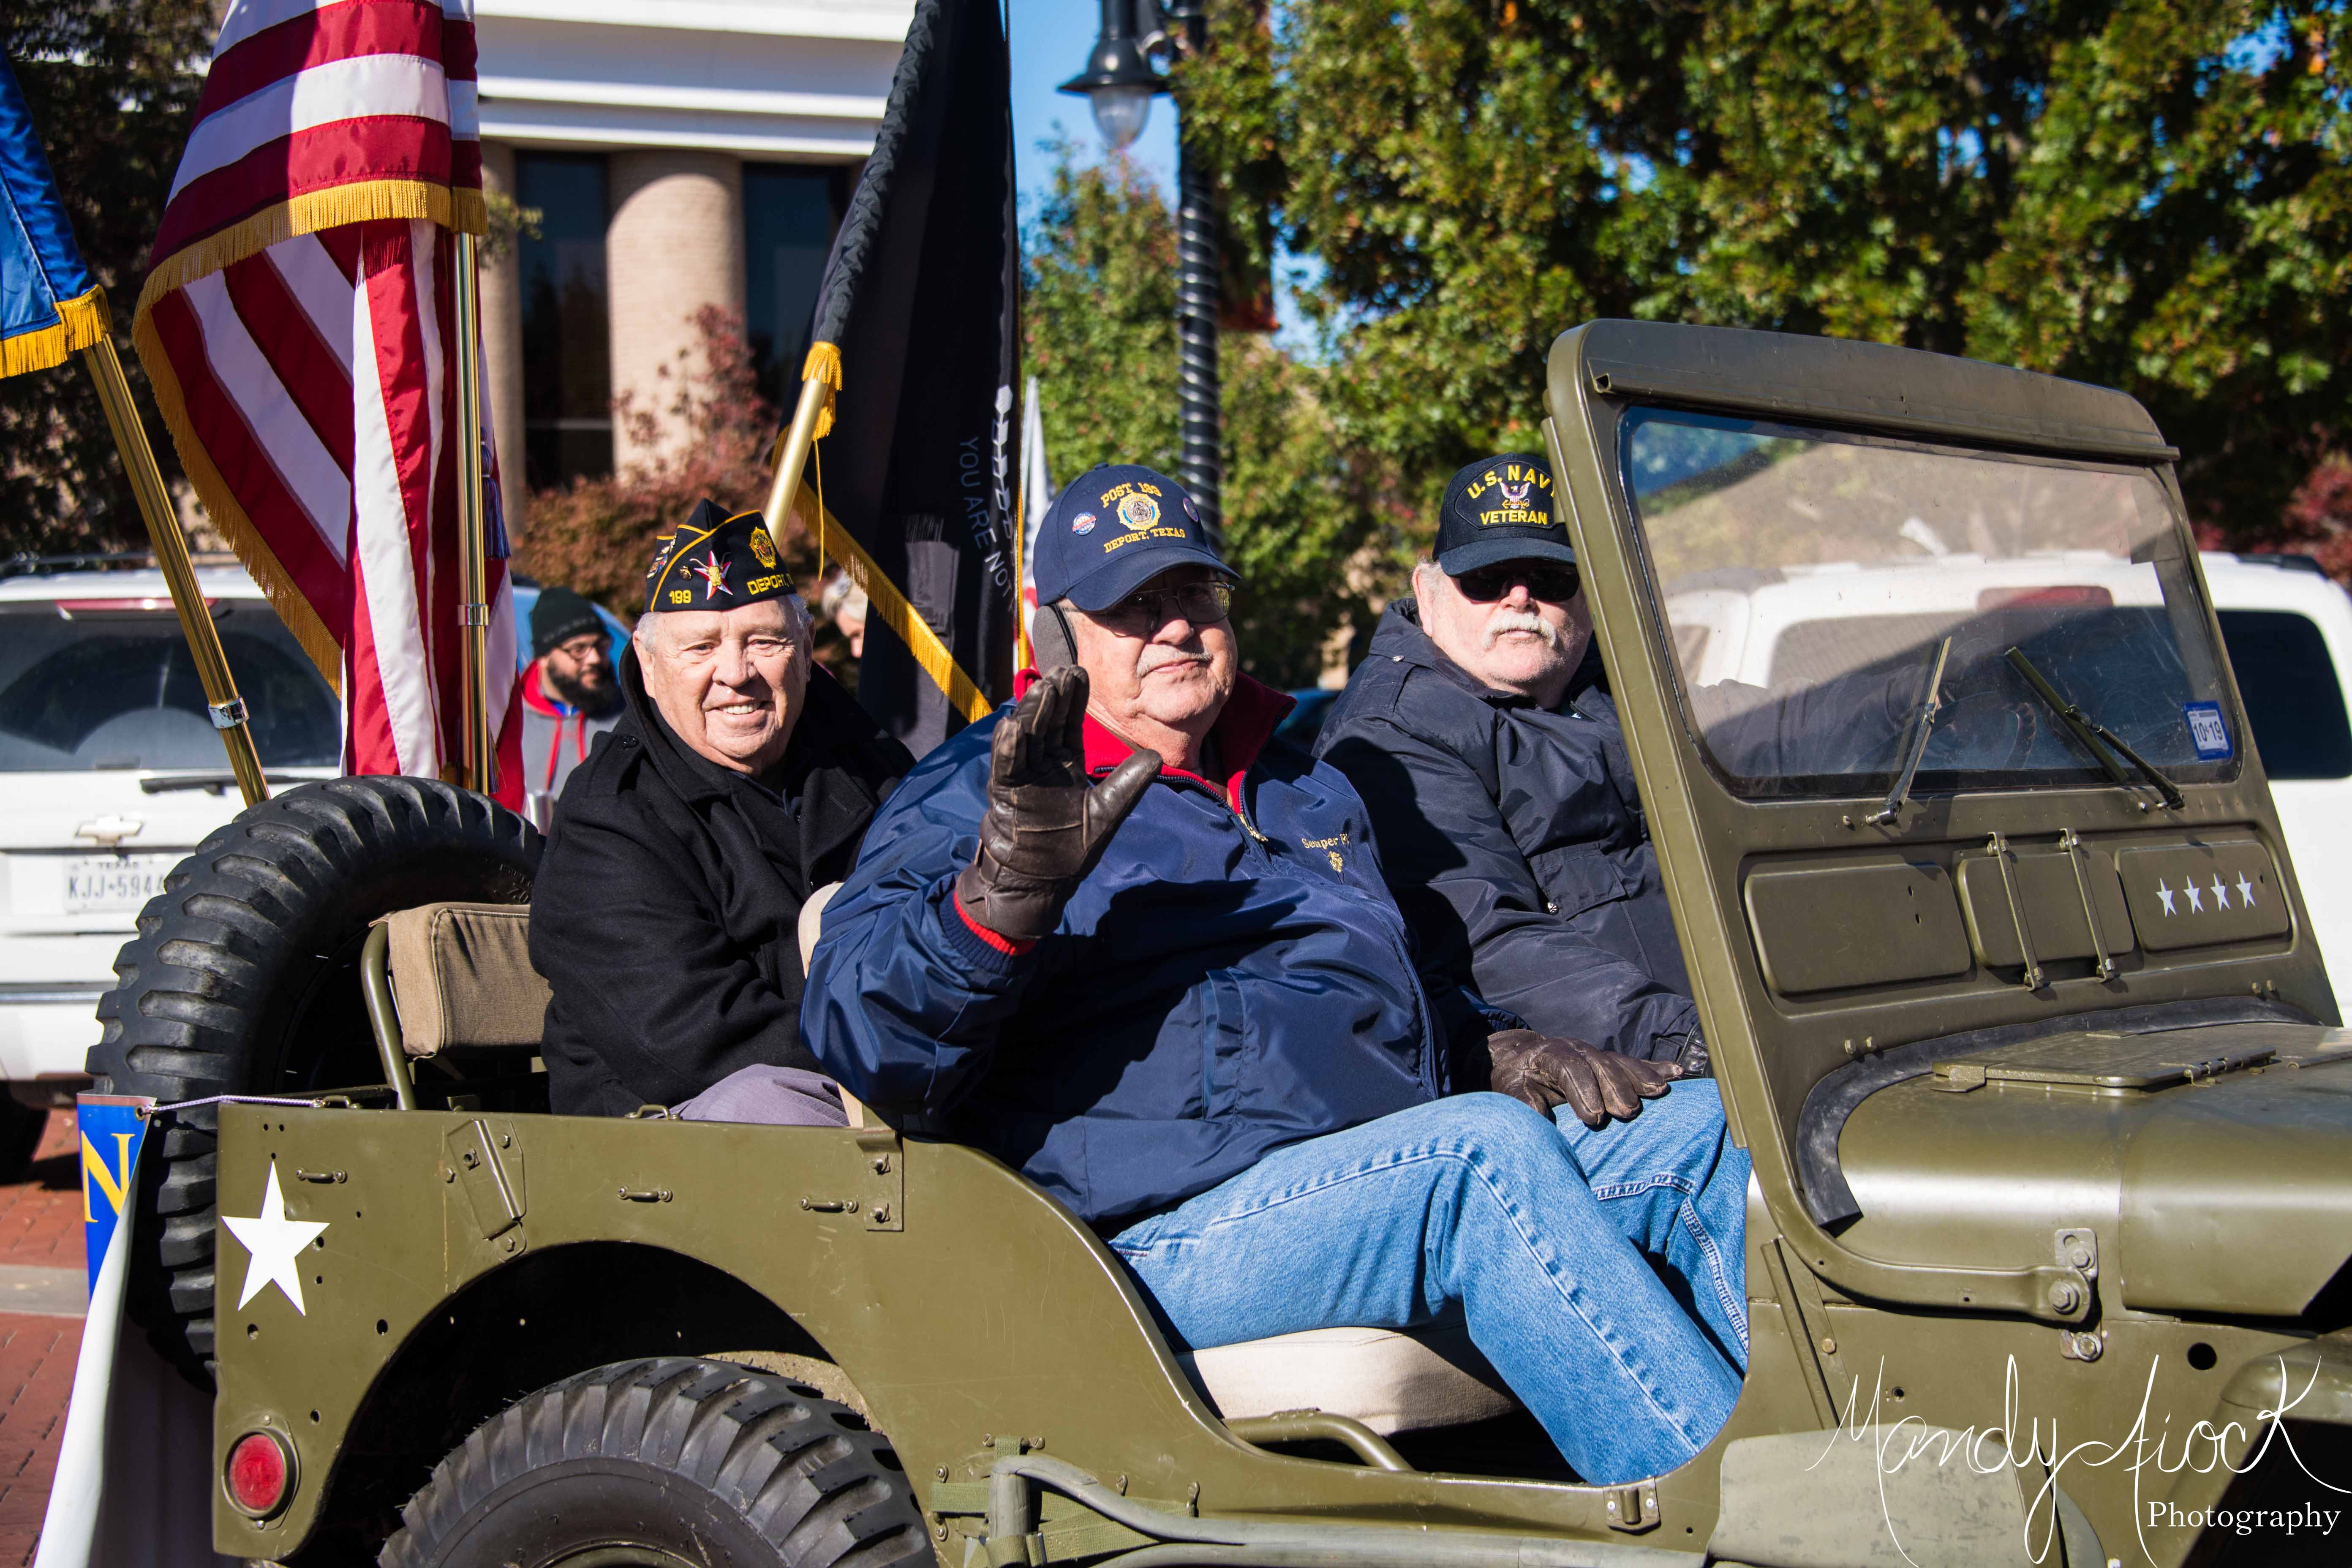 Photos from Last Weekend’s Veterans Day Parade by Mandy Fiock Photography!